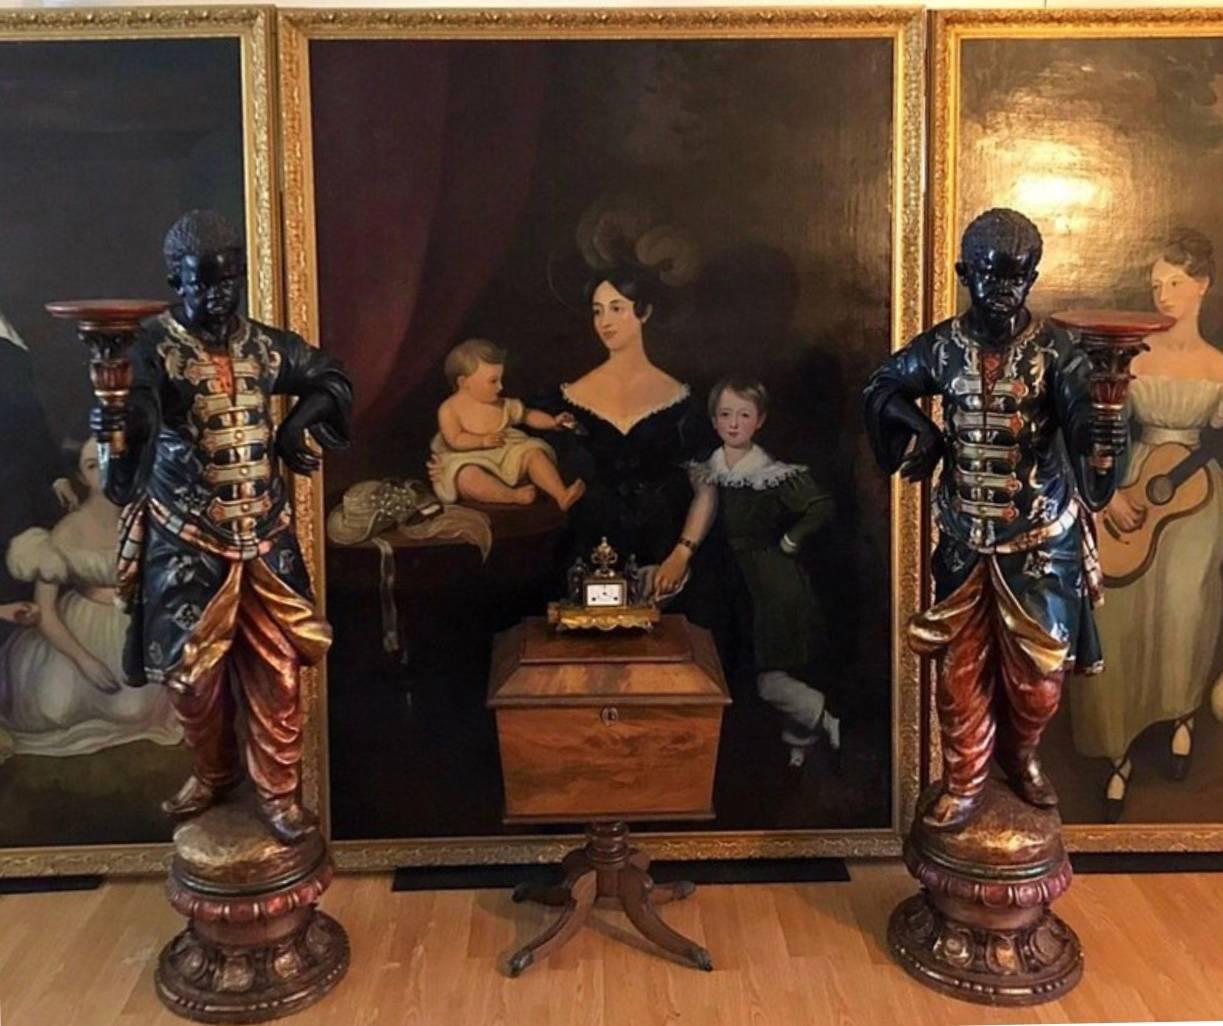 This is painting number Three of Three family portraits available.
 

A very rare opportunity to obtain one of three full size family portraits of the renowned Chandos-Pole family of Radbourne Hall, England.

These paintings would have been